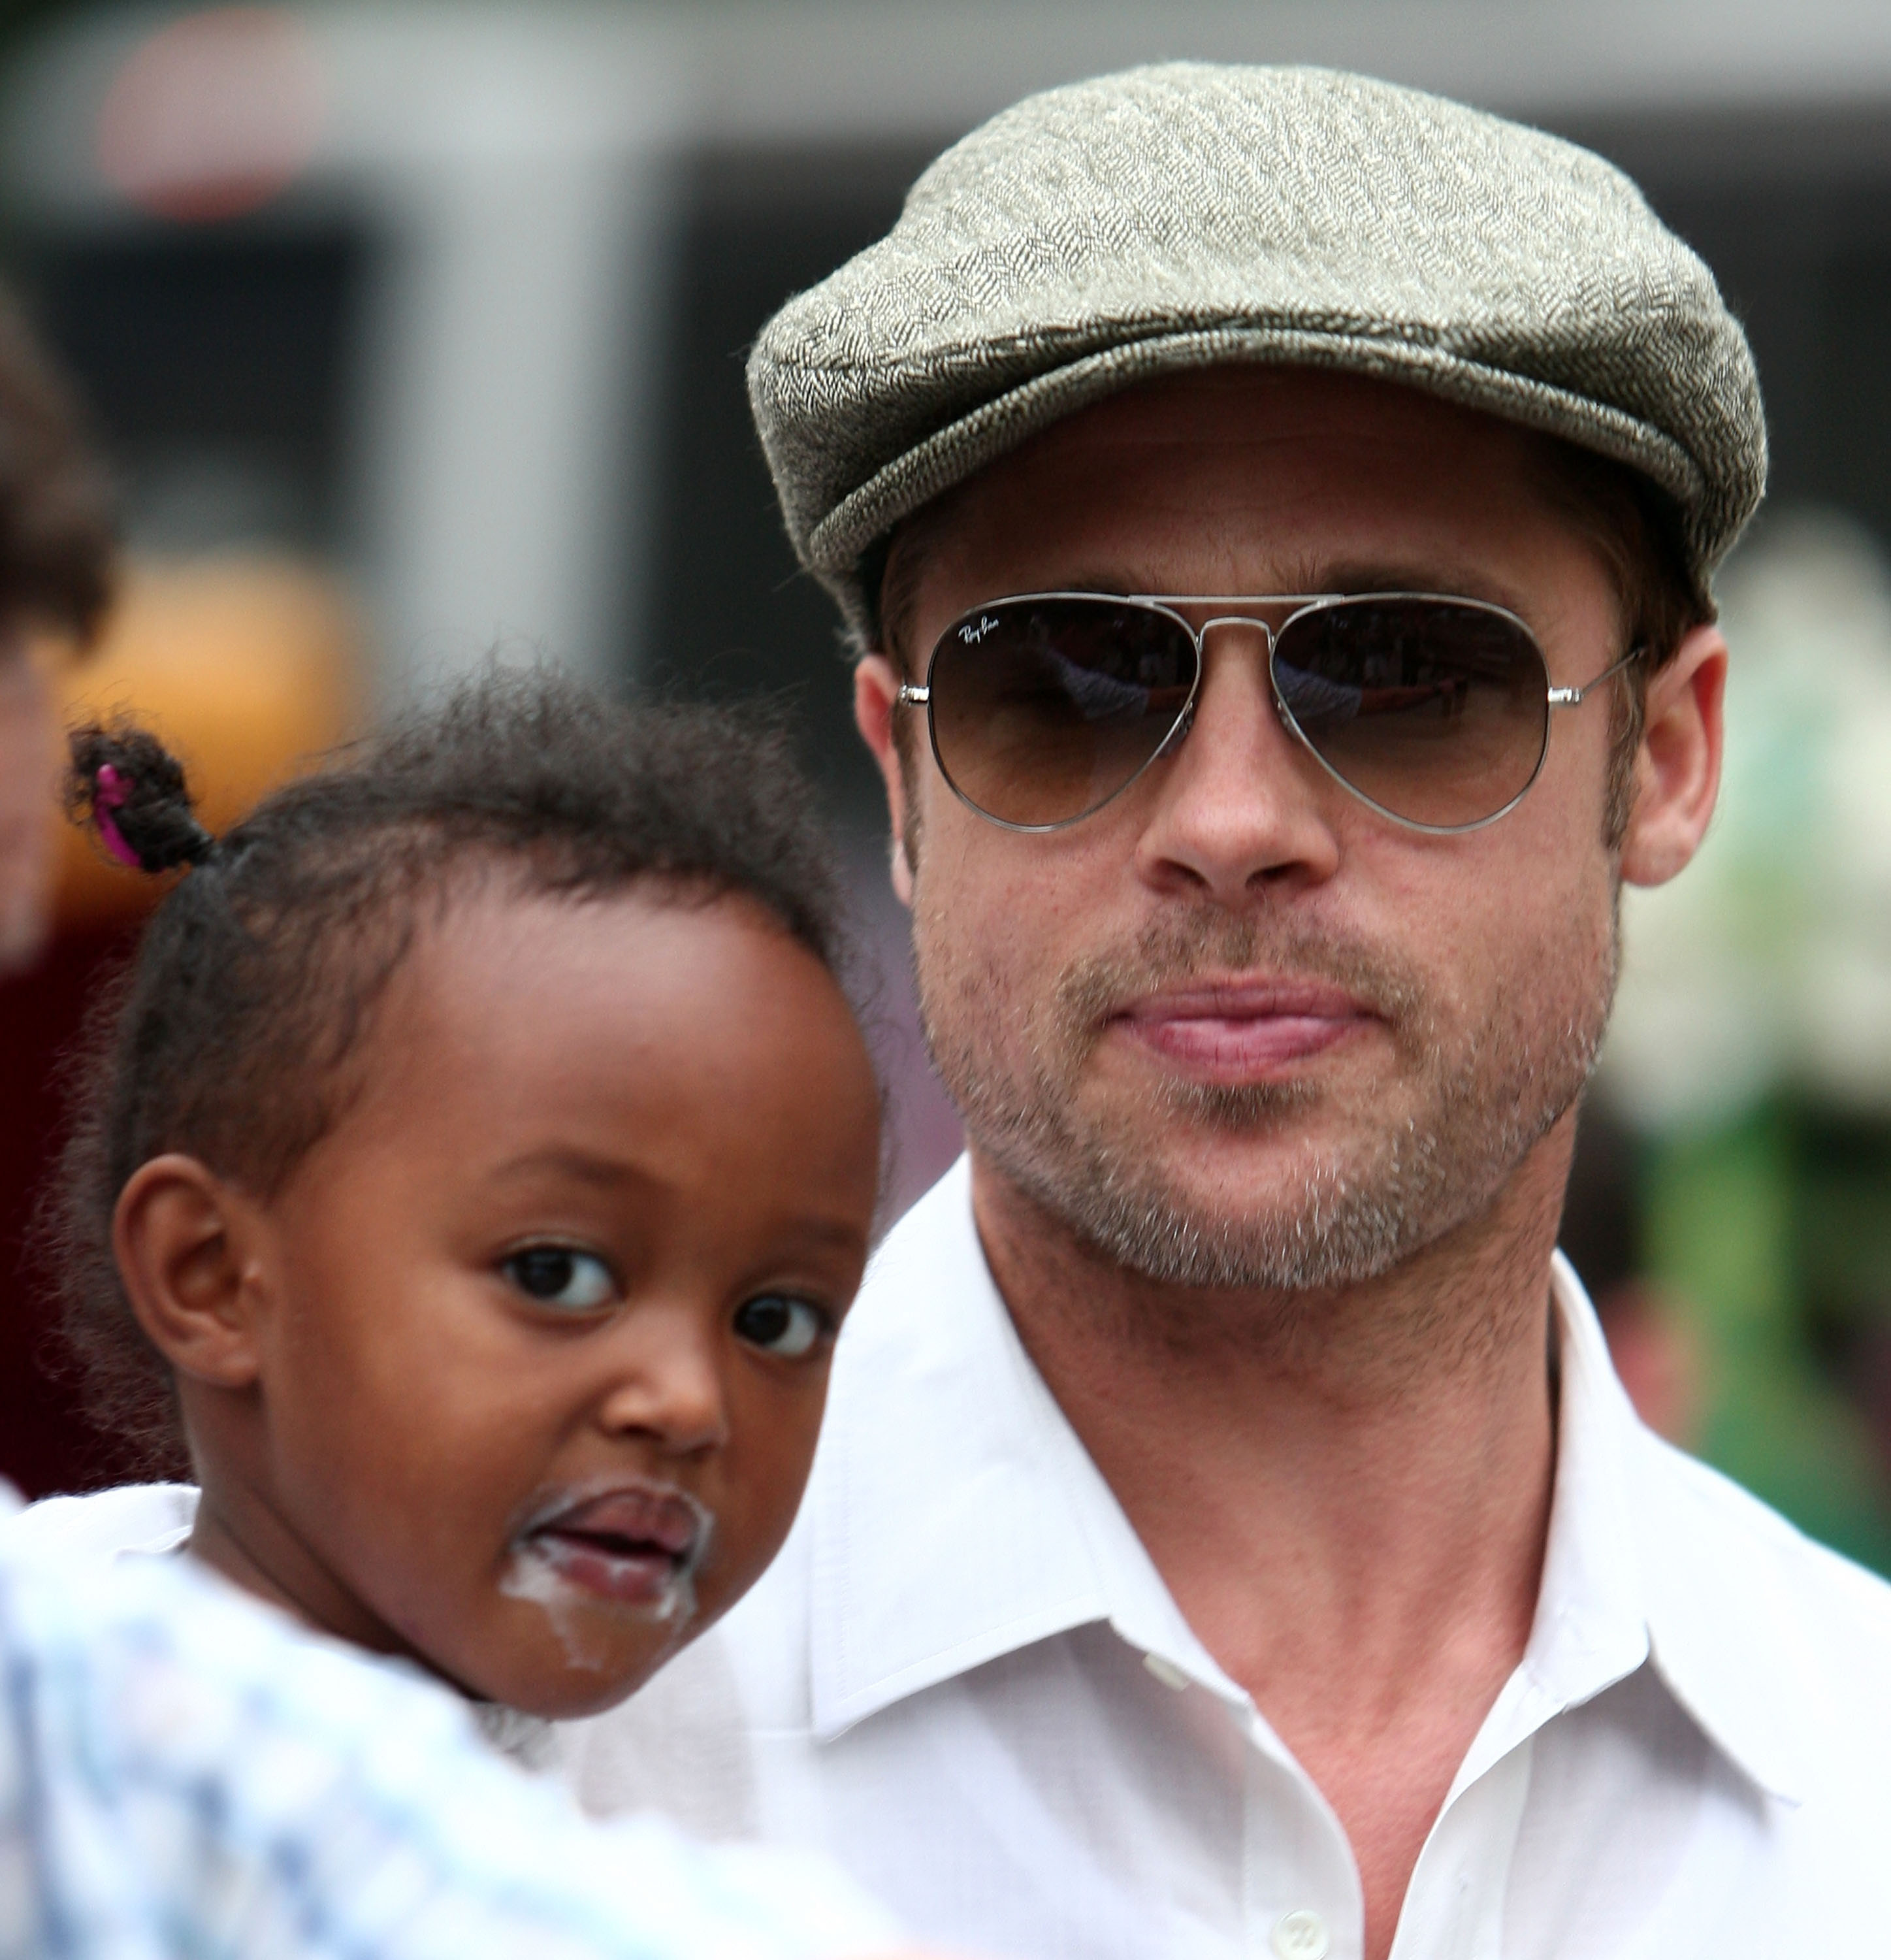 Brad Pitt and his daughter Zahara Jolie-Pitt visiting Central Park on August 28, 2007 in New York City | Source: Getty Images